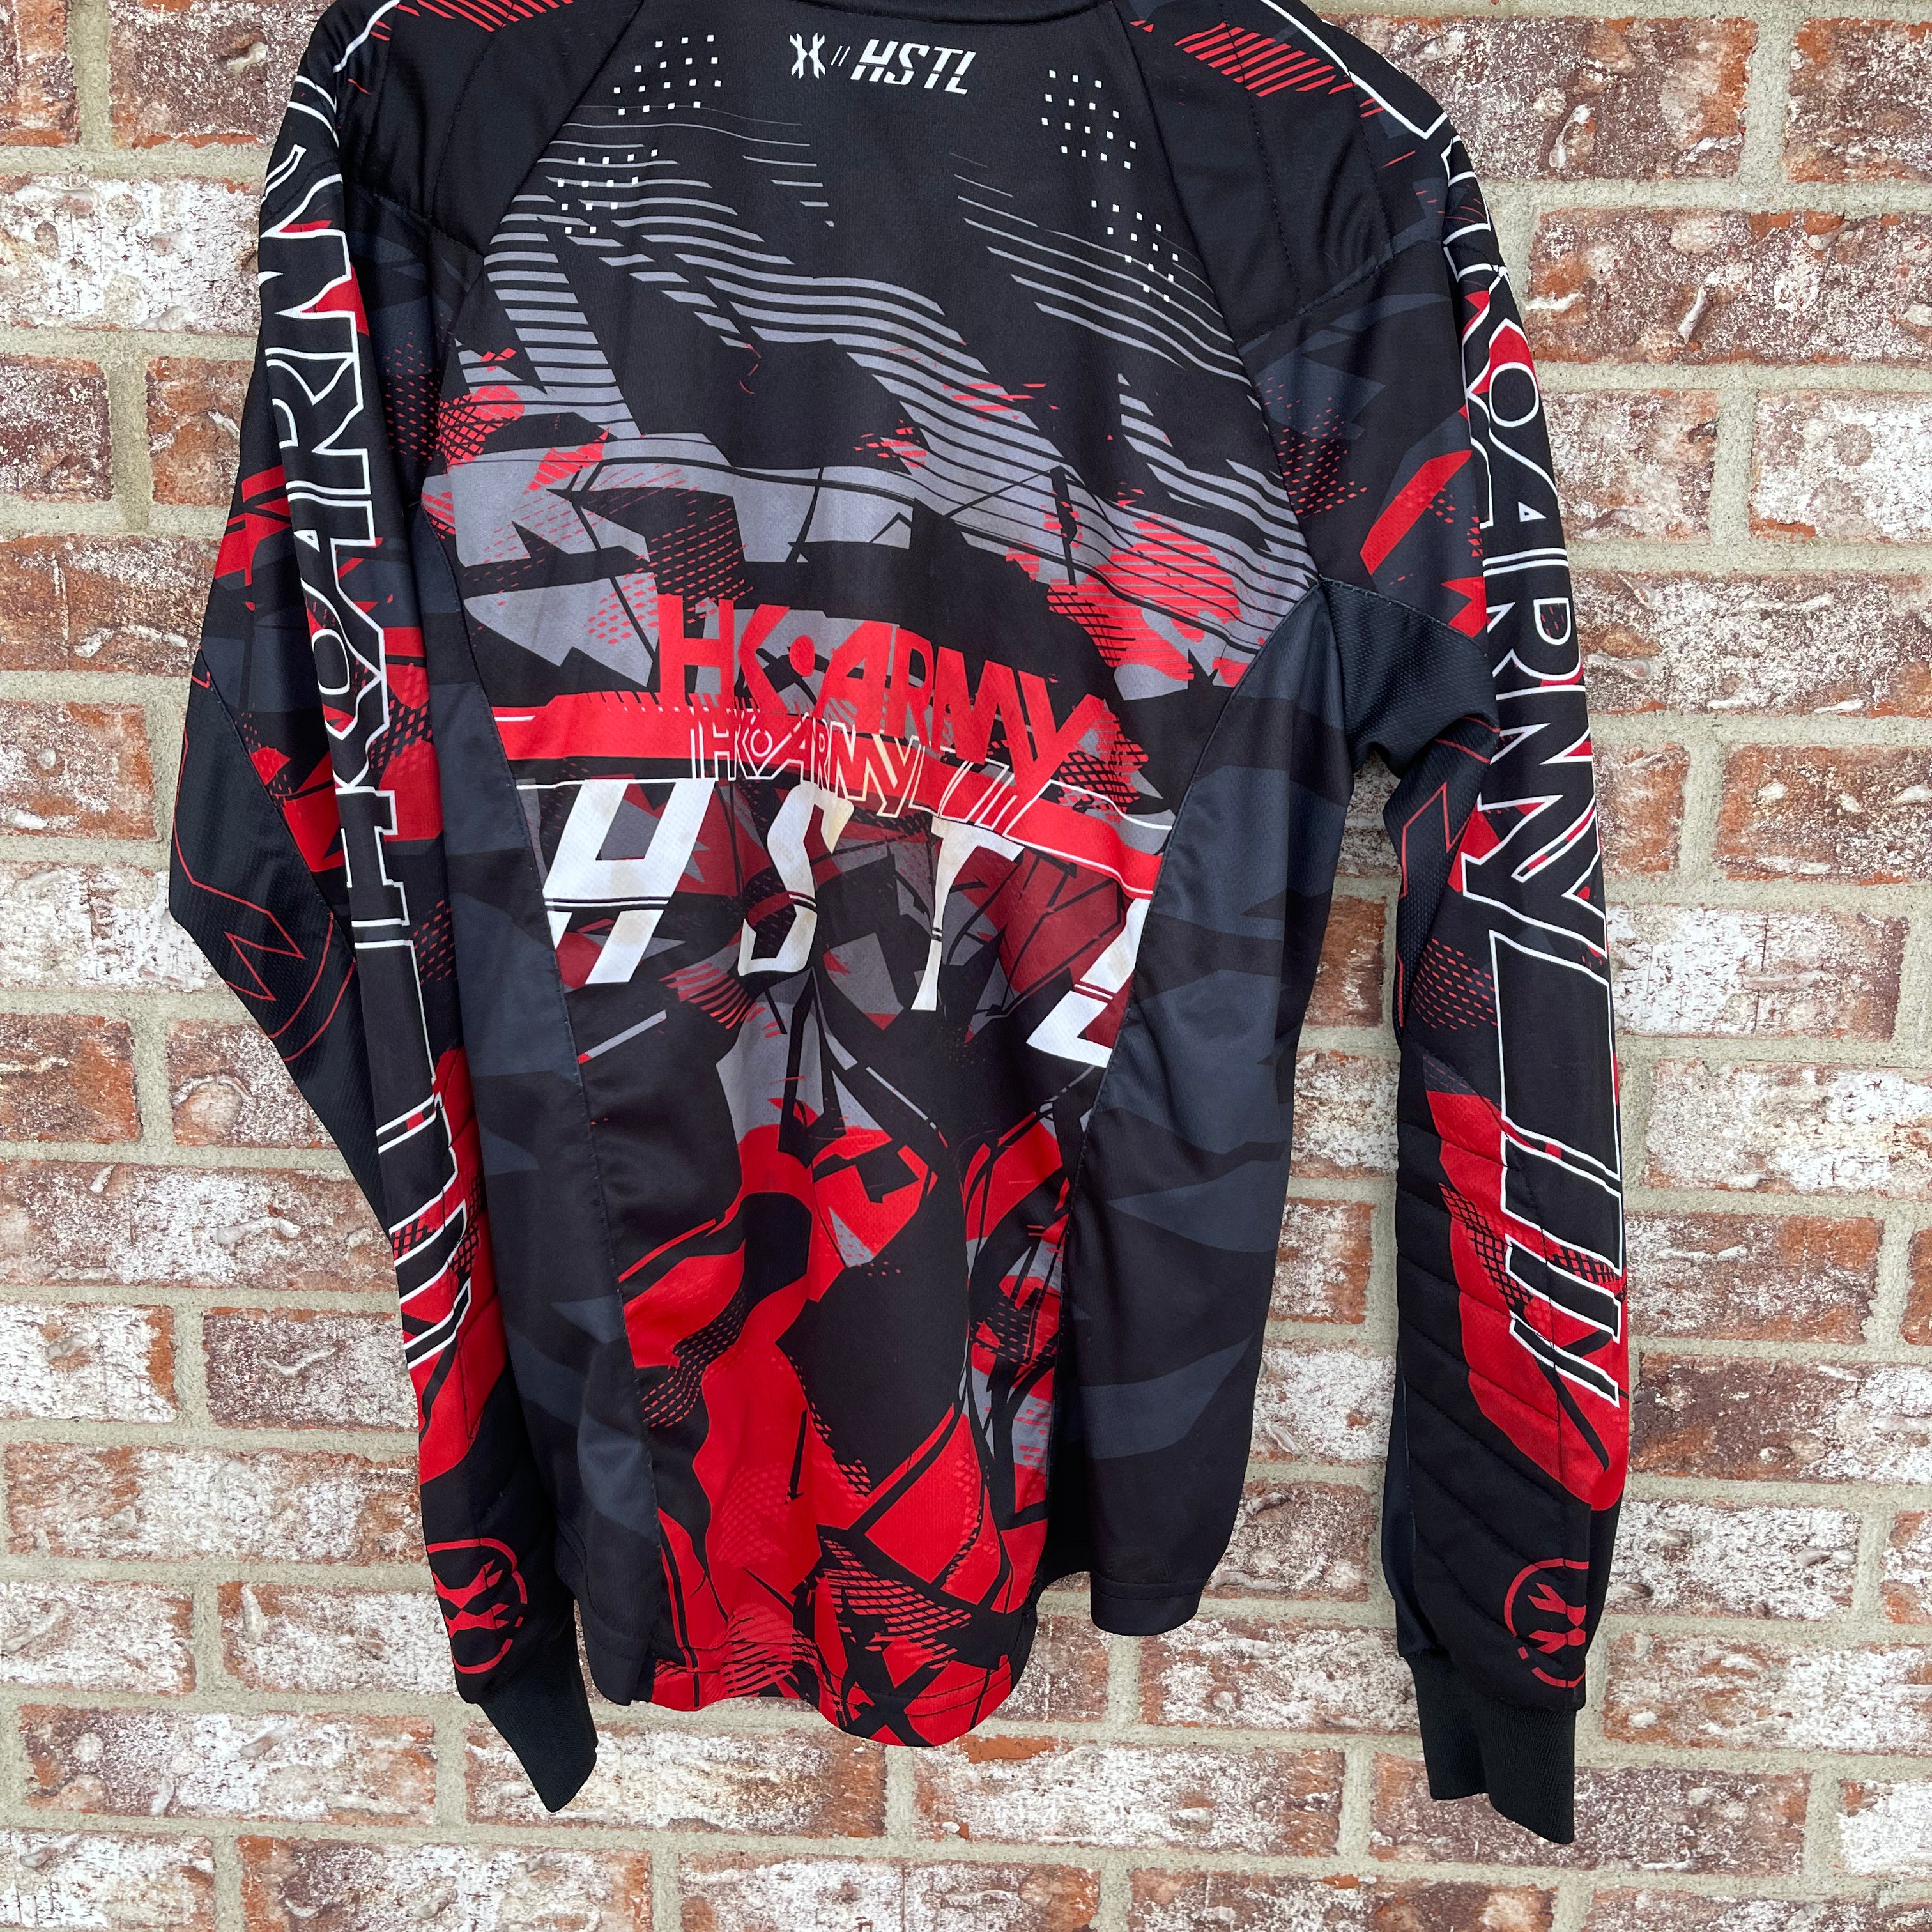 Used HK Army HSTL Paintball Jersey - Red/Black/White - Small